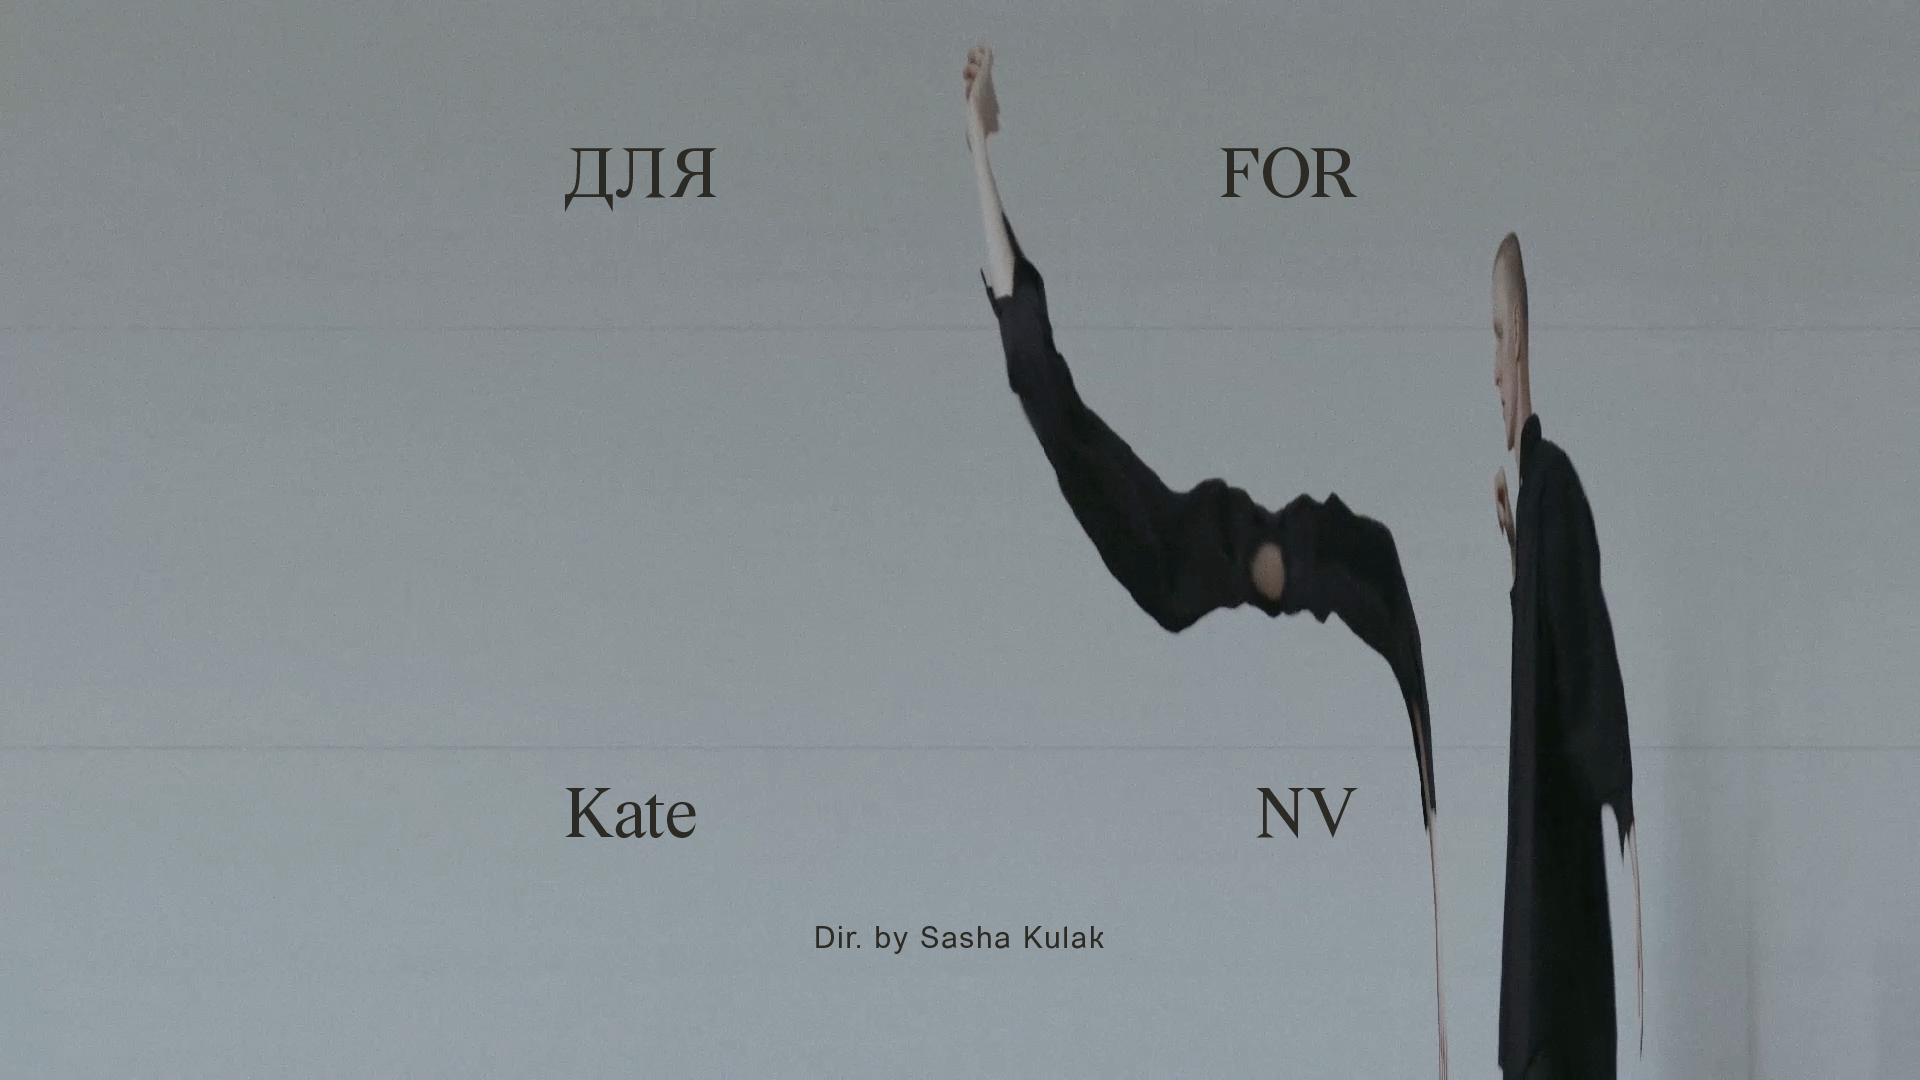 Link to Video for Kate NV – KAK HOW